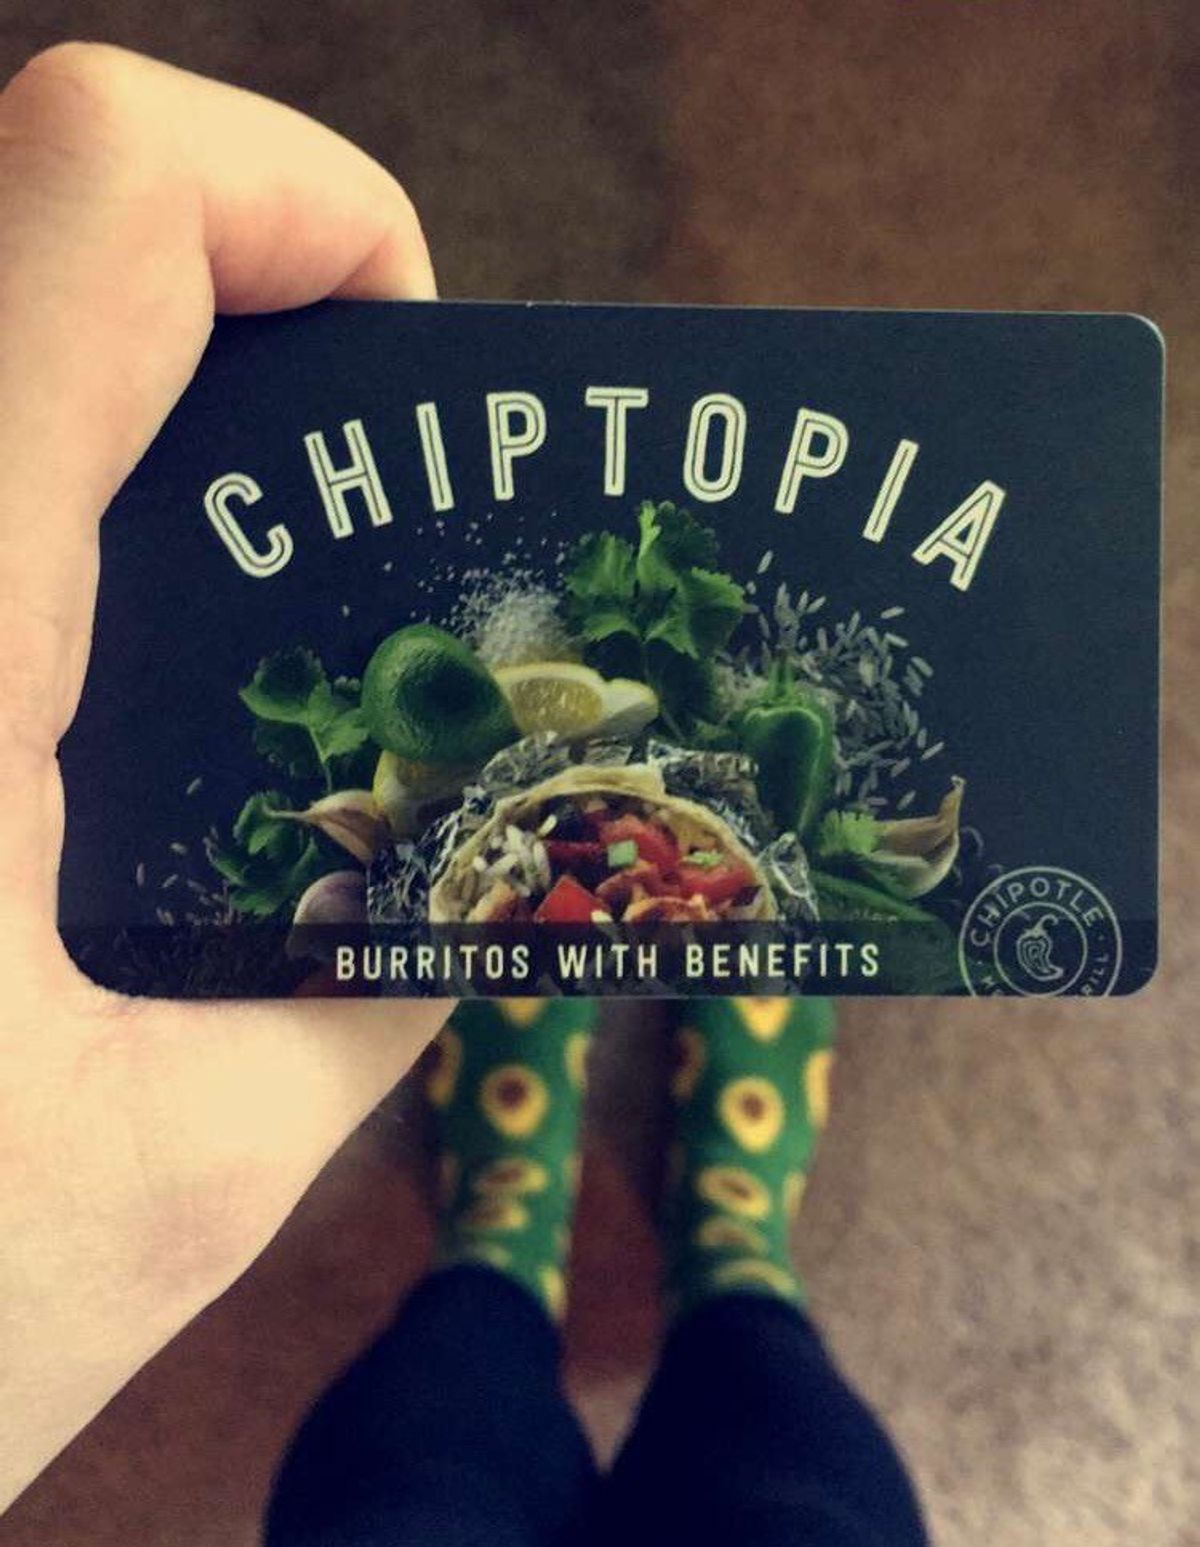 I Signed Up For Chipotle's Loyalty Rewards Program "Chiptopia"